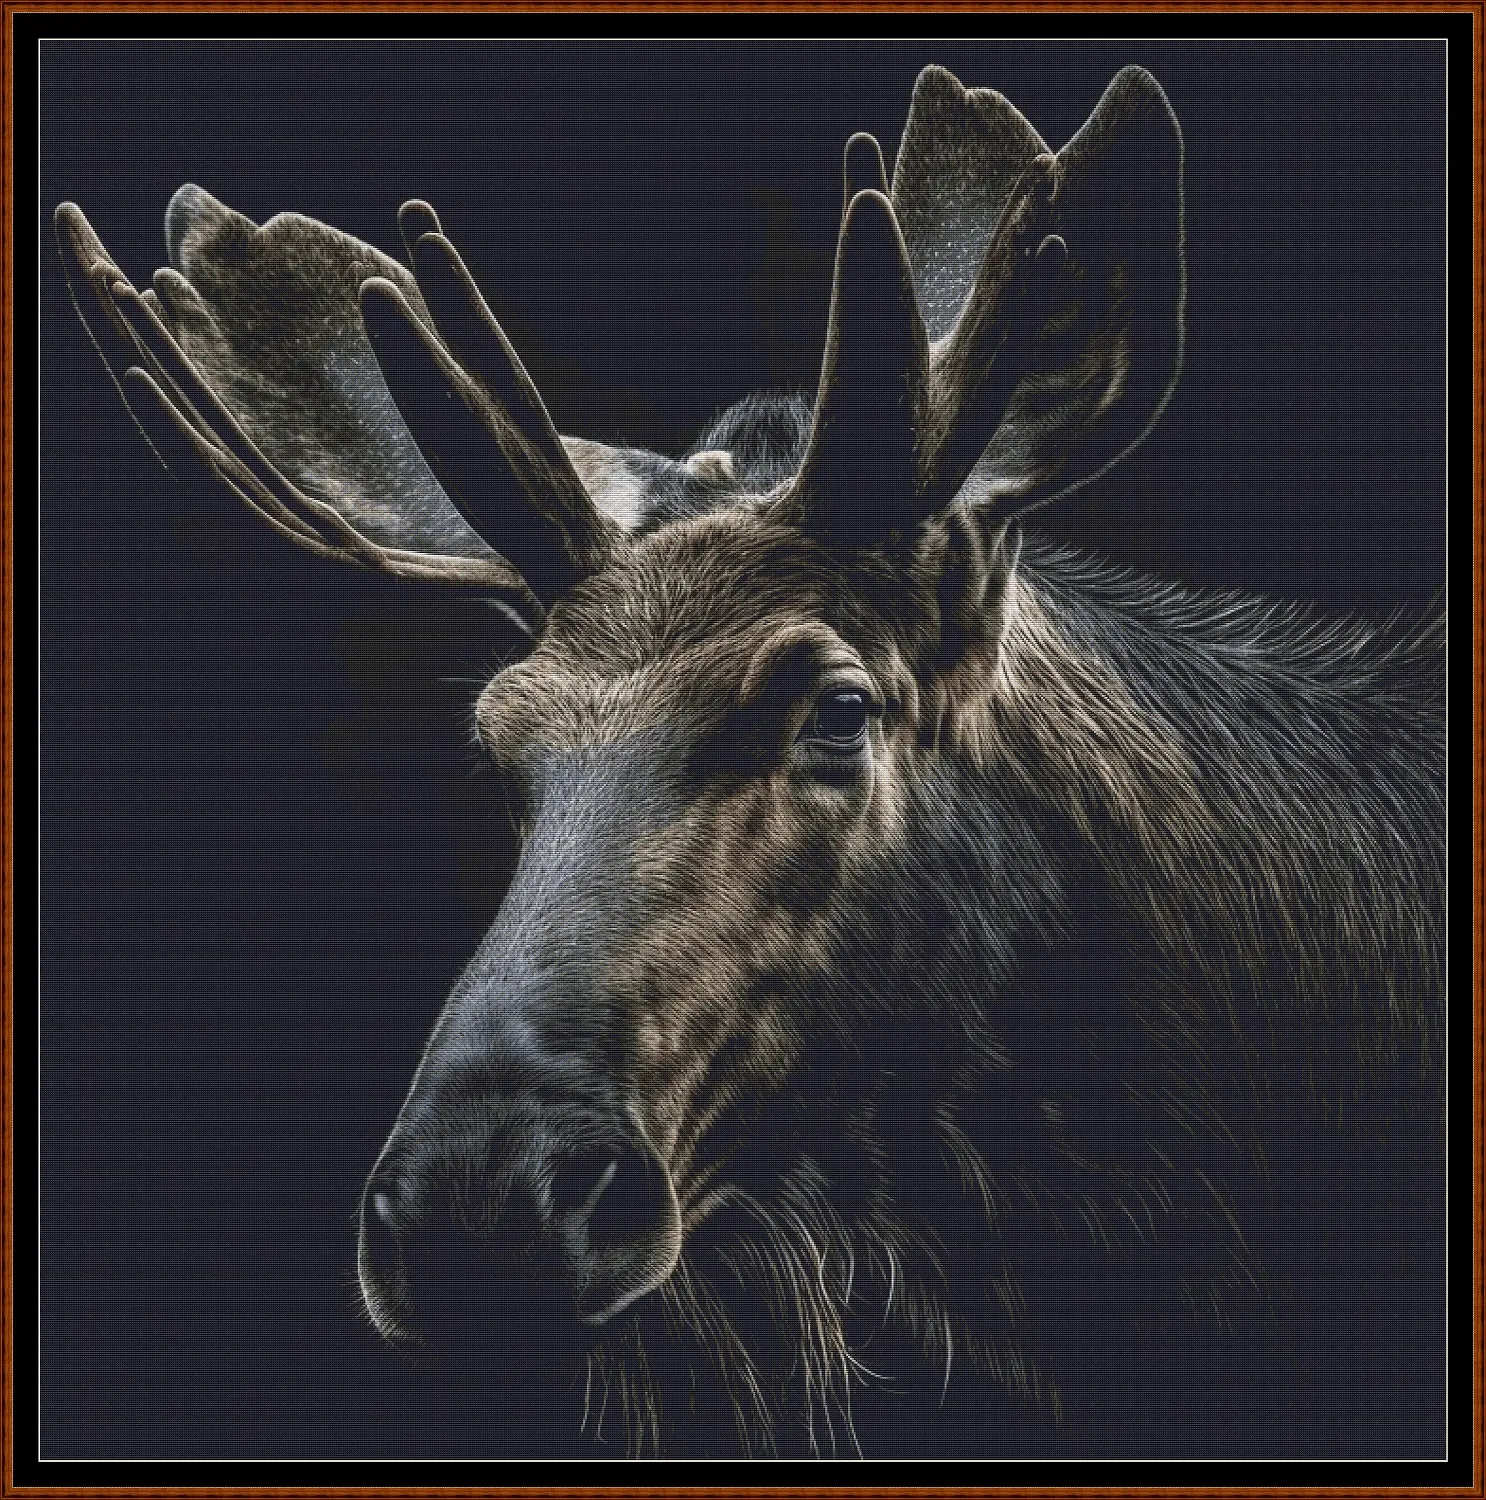 Moose patterns are expertly created from art by Karsten Bergmann under Public Domain CC0 license